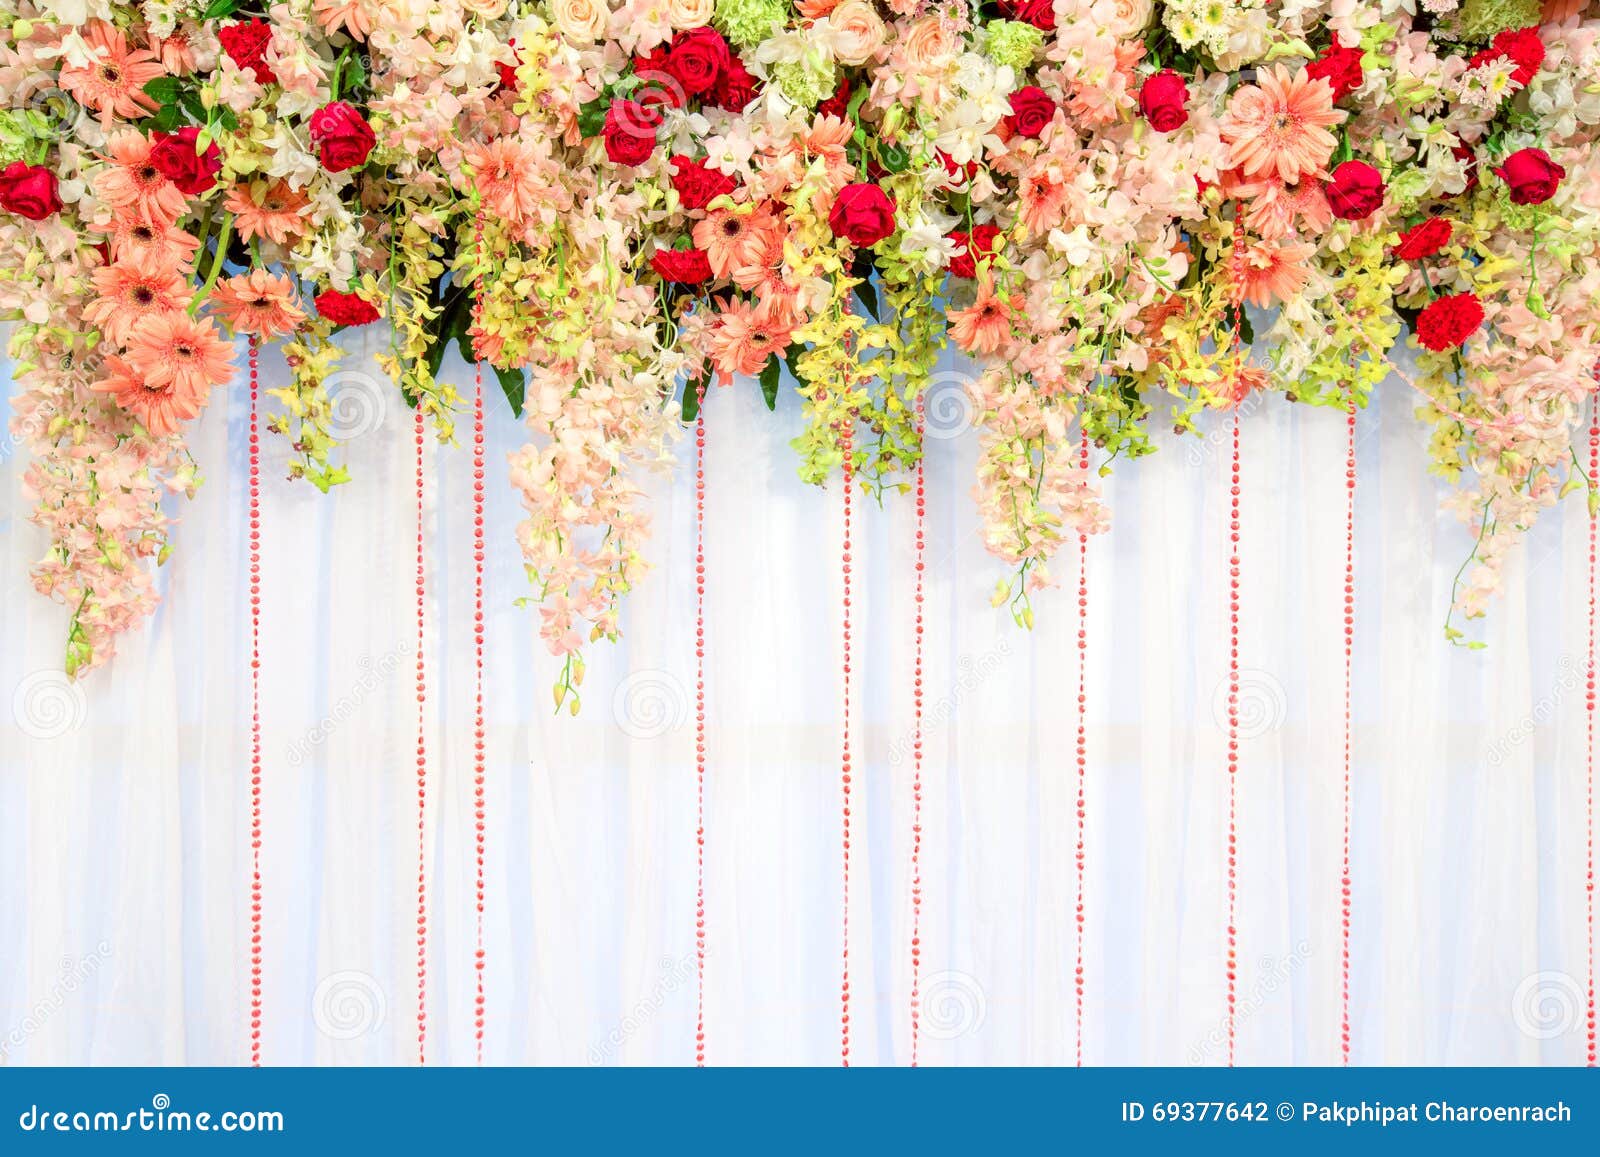 Beautiful Flowers and Wave Curtain Wall Background - Wedding Ceremony  Scene. Stock Photo - Image of bouquet, marriage: 69377642